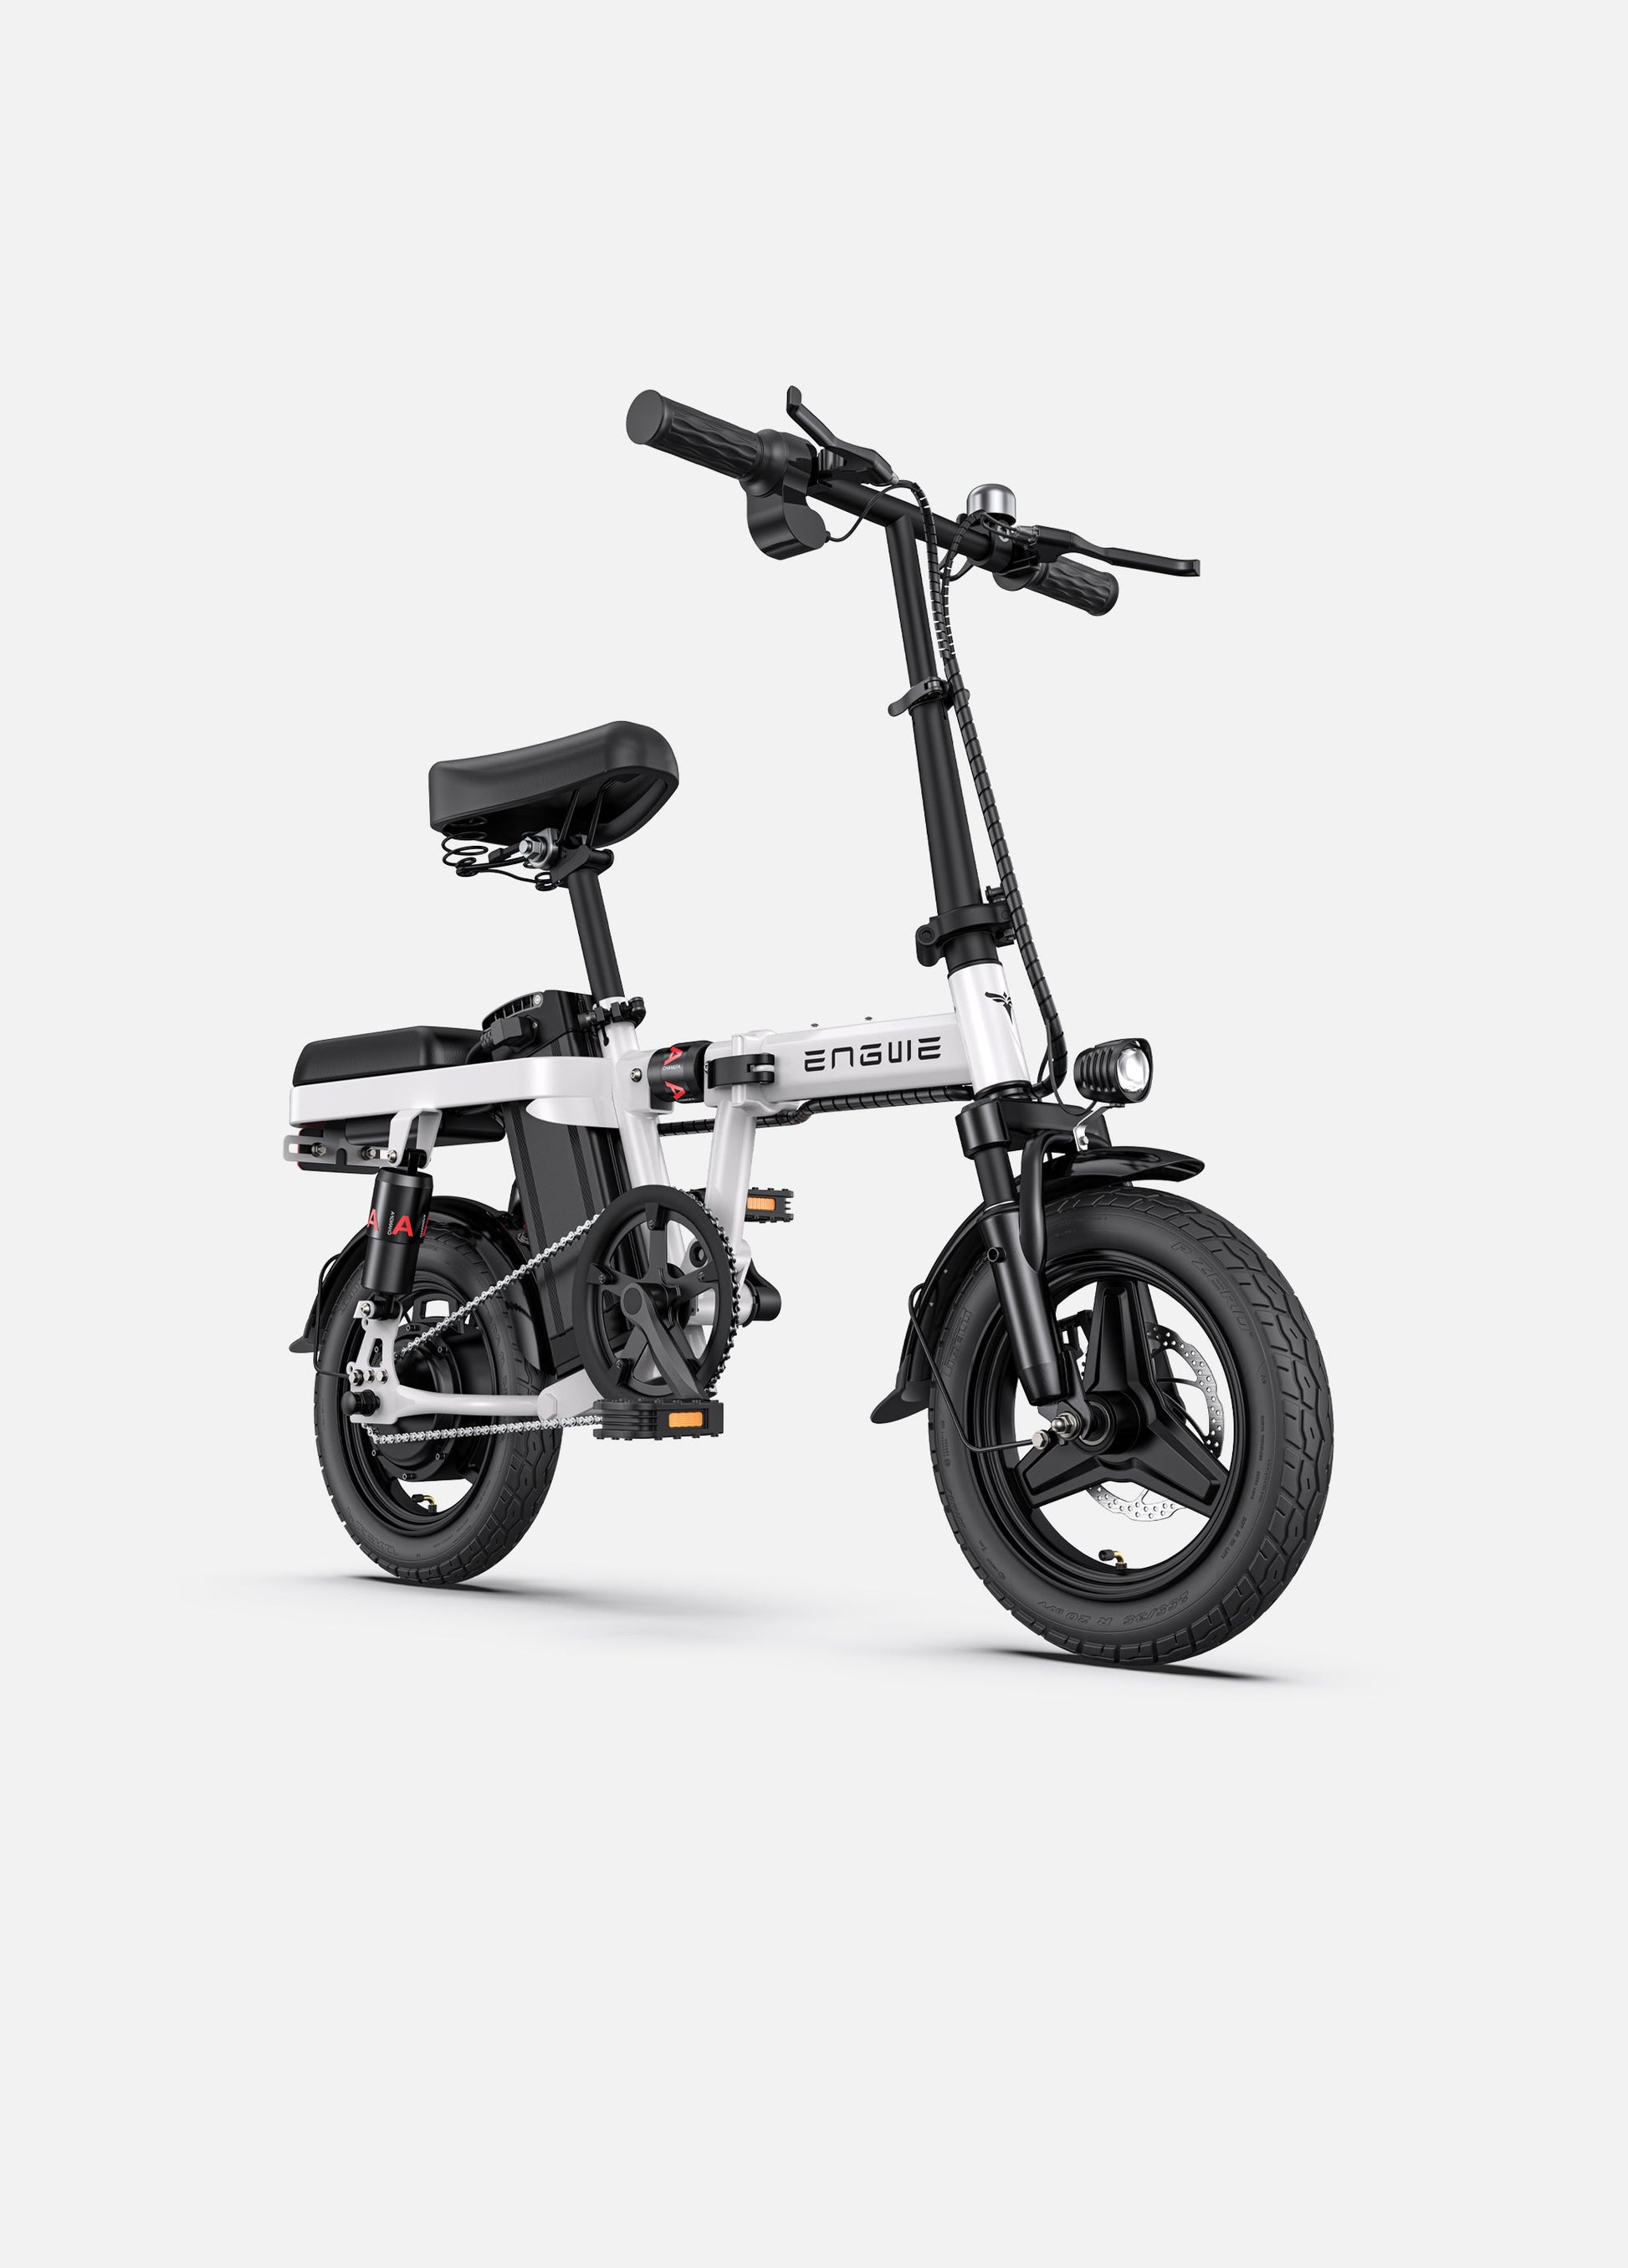 White Engwe T14 foldable electric bike showcased against a white background, emphasizing its bold color and compact frame.